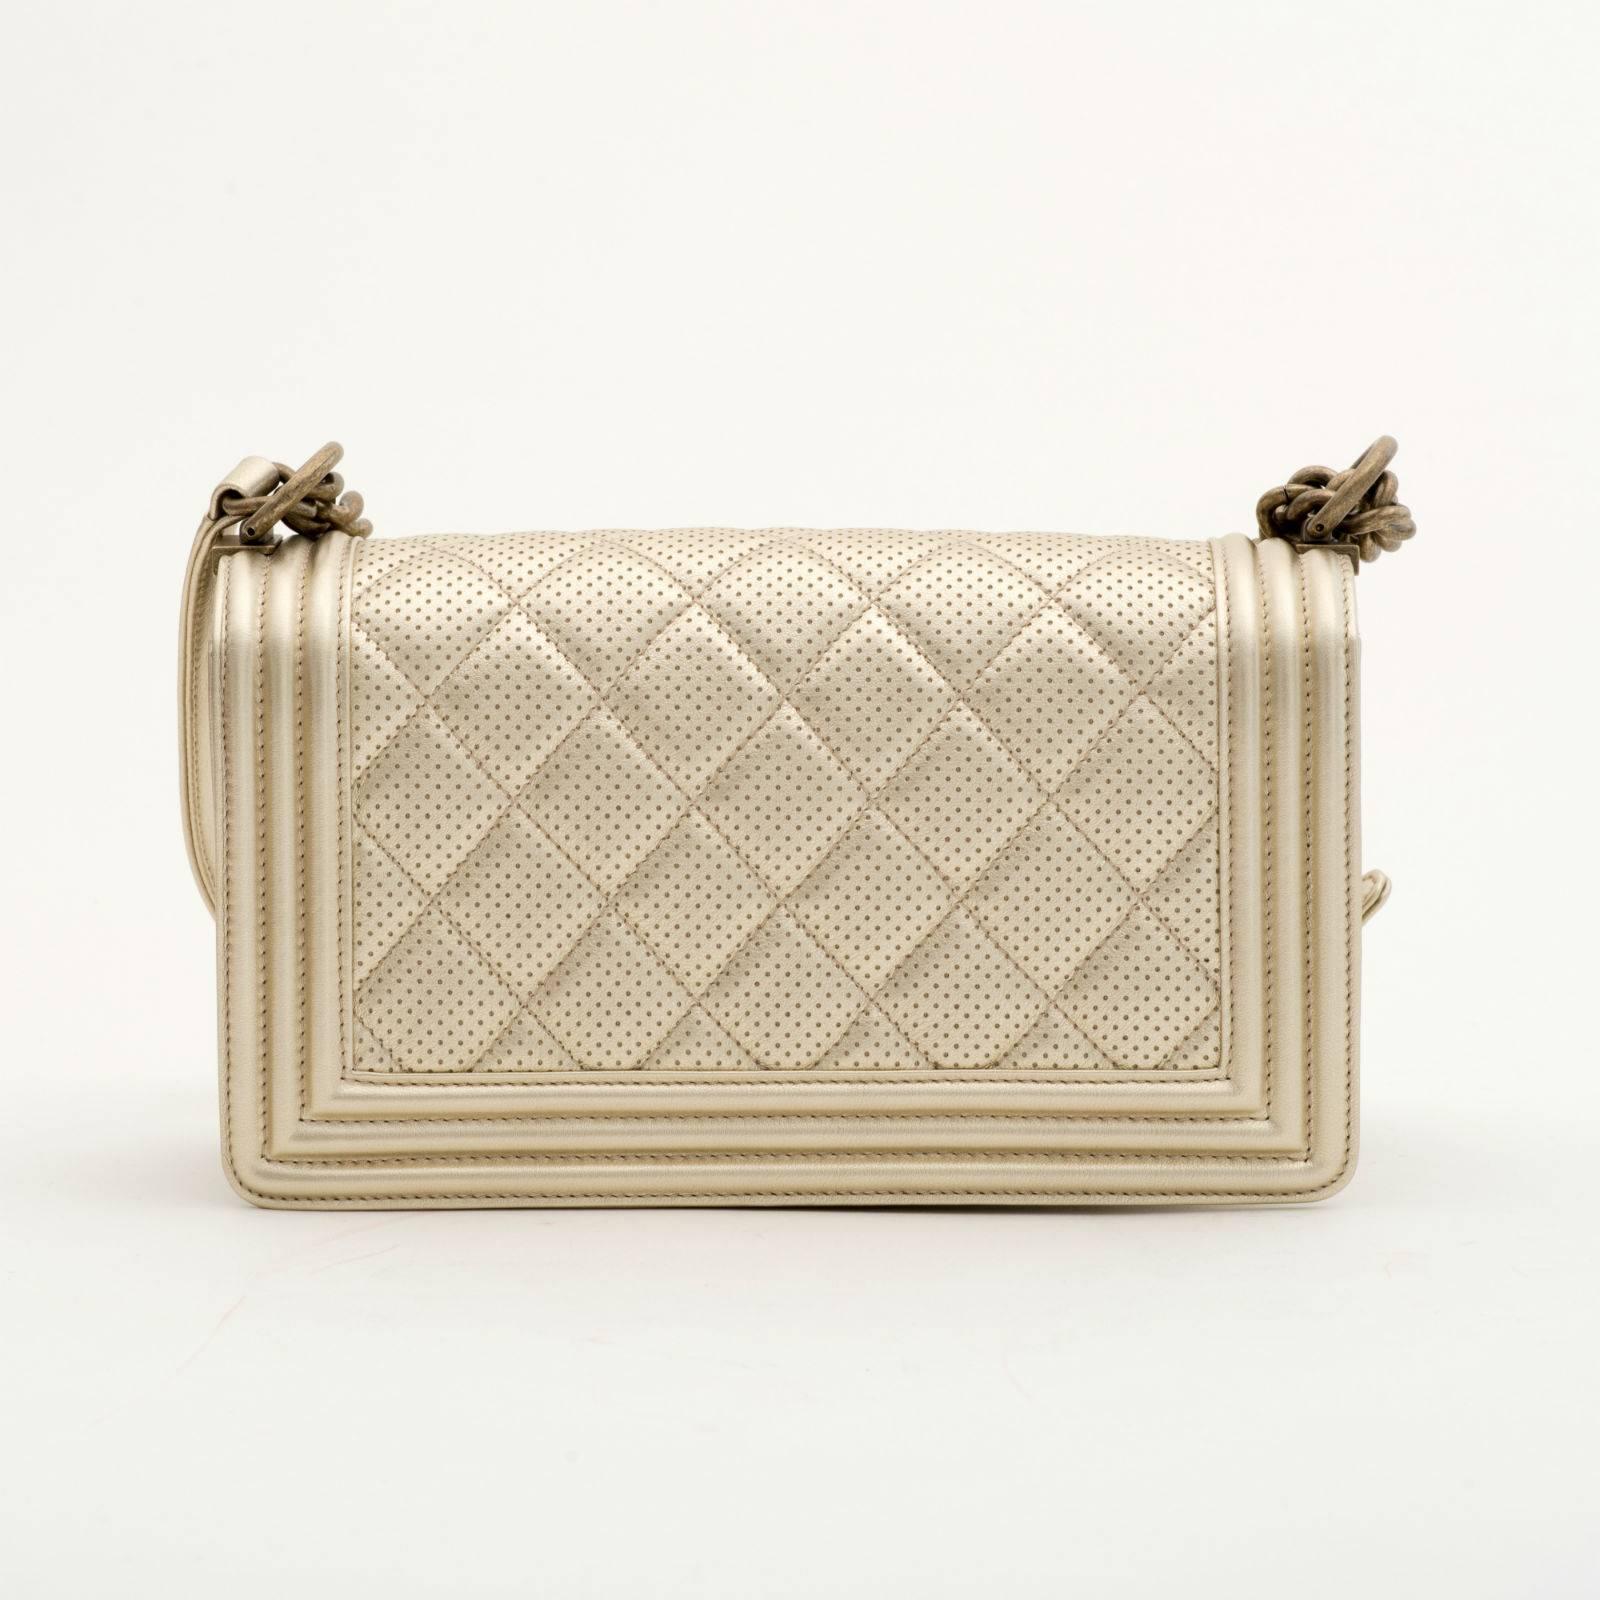 Chanel Perforated Quilted Leather Gold

Chanel Perforated Quilted Leather Gold perforated quilted leather with antique gold tone hardware.
This bag features a full front flap with the signature Le Boy CC push lock closure and a chain link, and